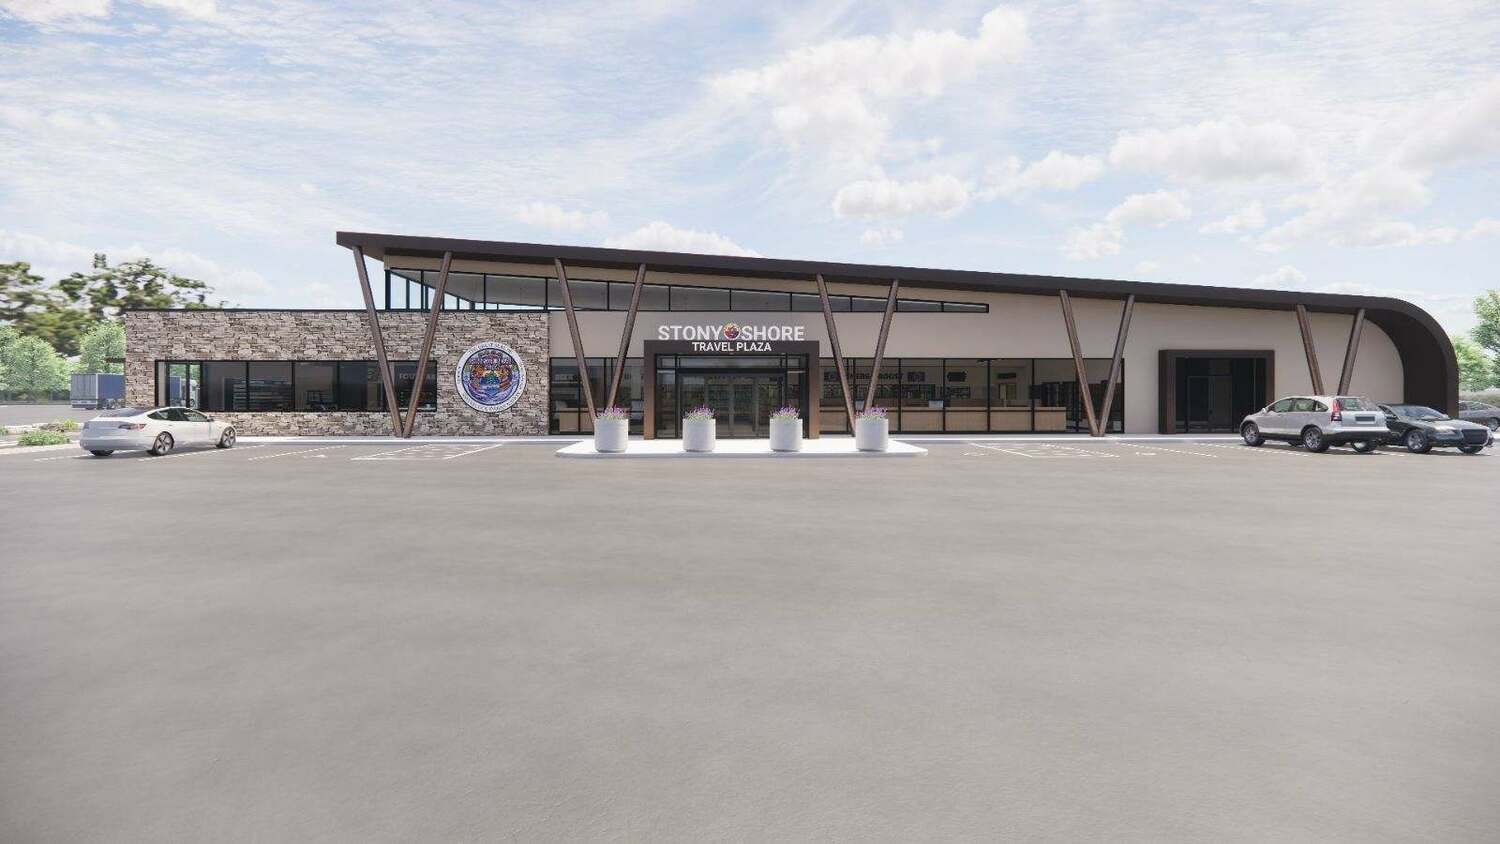 Initial renderings of the planned gas station and travel plaza that will be constructed on 10 acres of land owned by the Shinnecock Nation in Hampton Bays. COURTESY EASTERN WOODLAND PETROLEUM